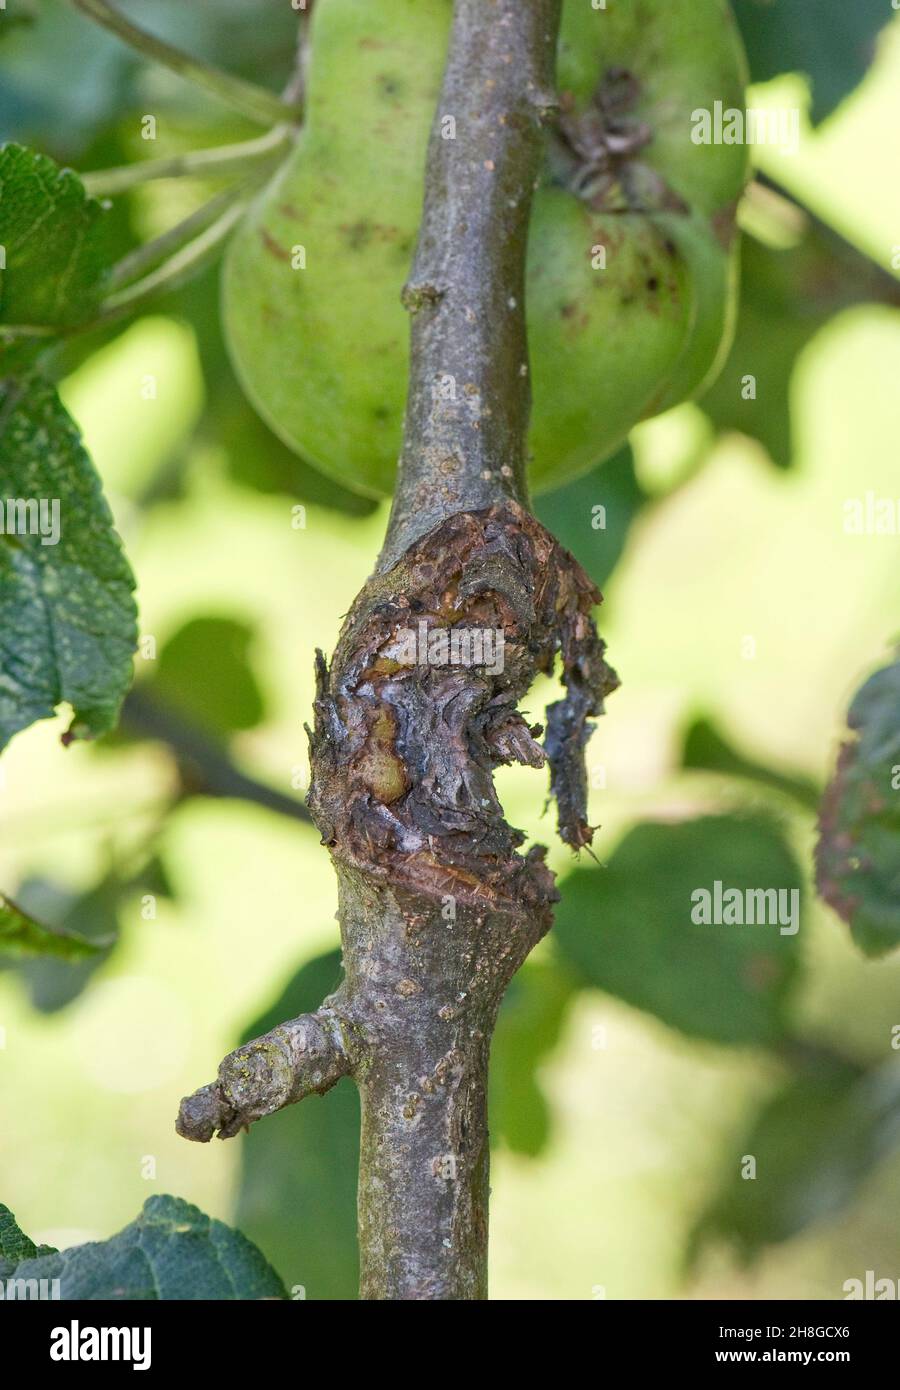 Apple canker (Neonectria ditissima) severe lesion on small apple tree branch in summer, Berkshire, August Stock Photo